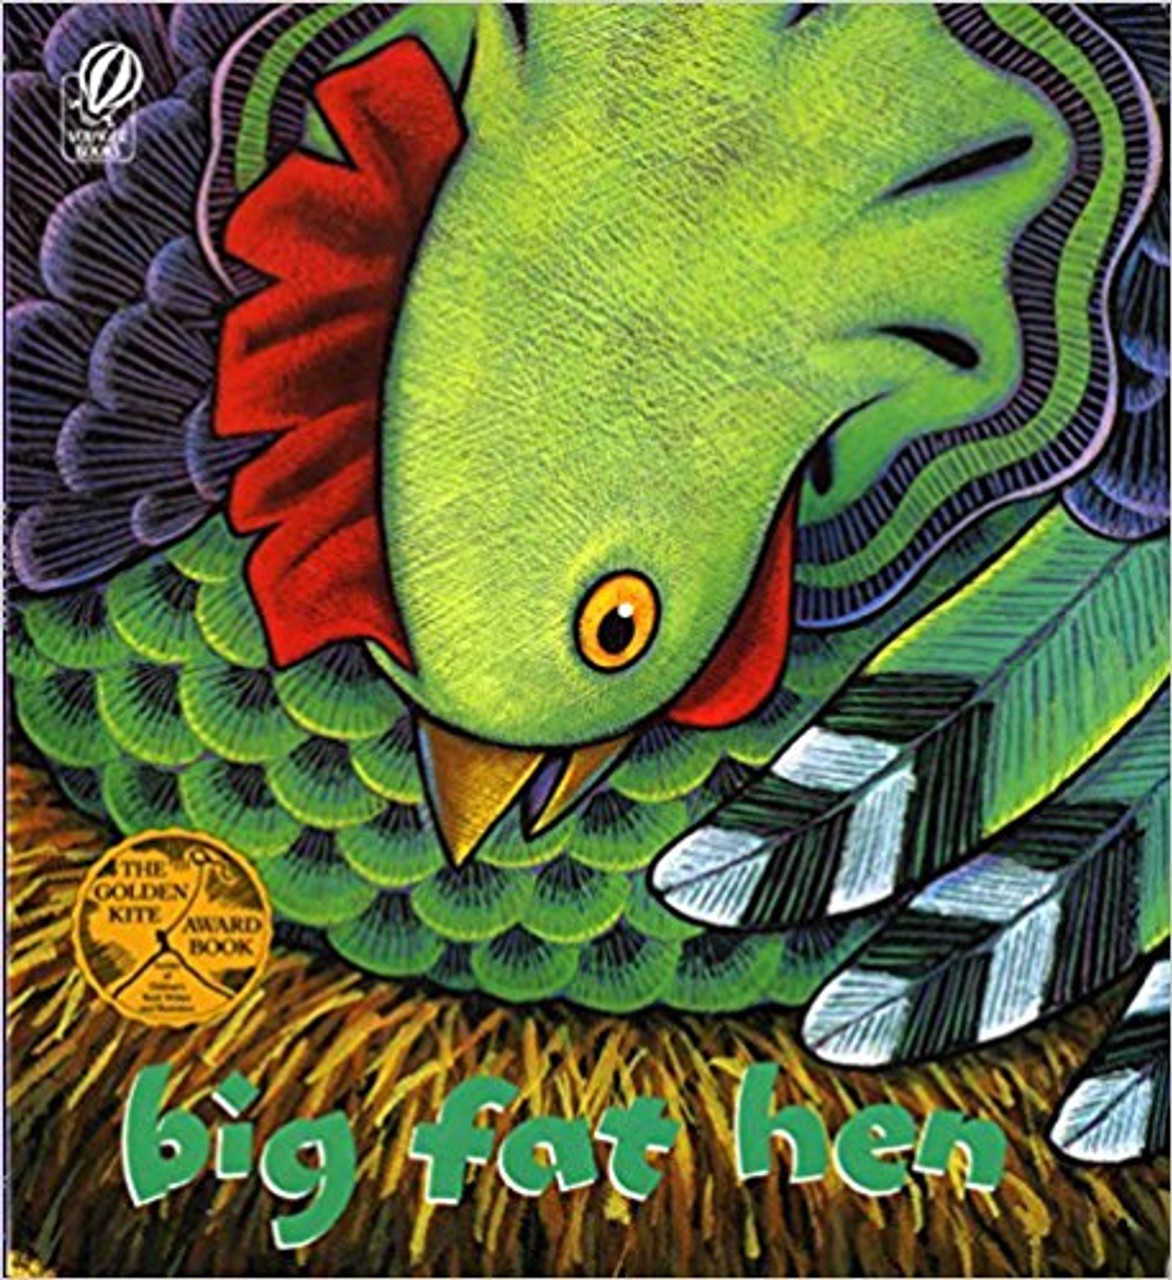 Big Fat Hen (Paperback) by Keith Baker